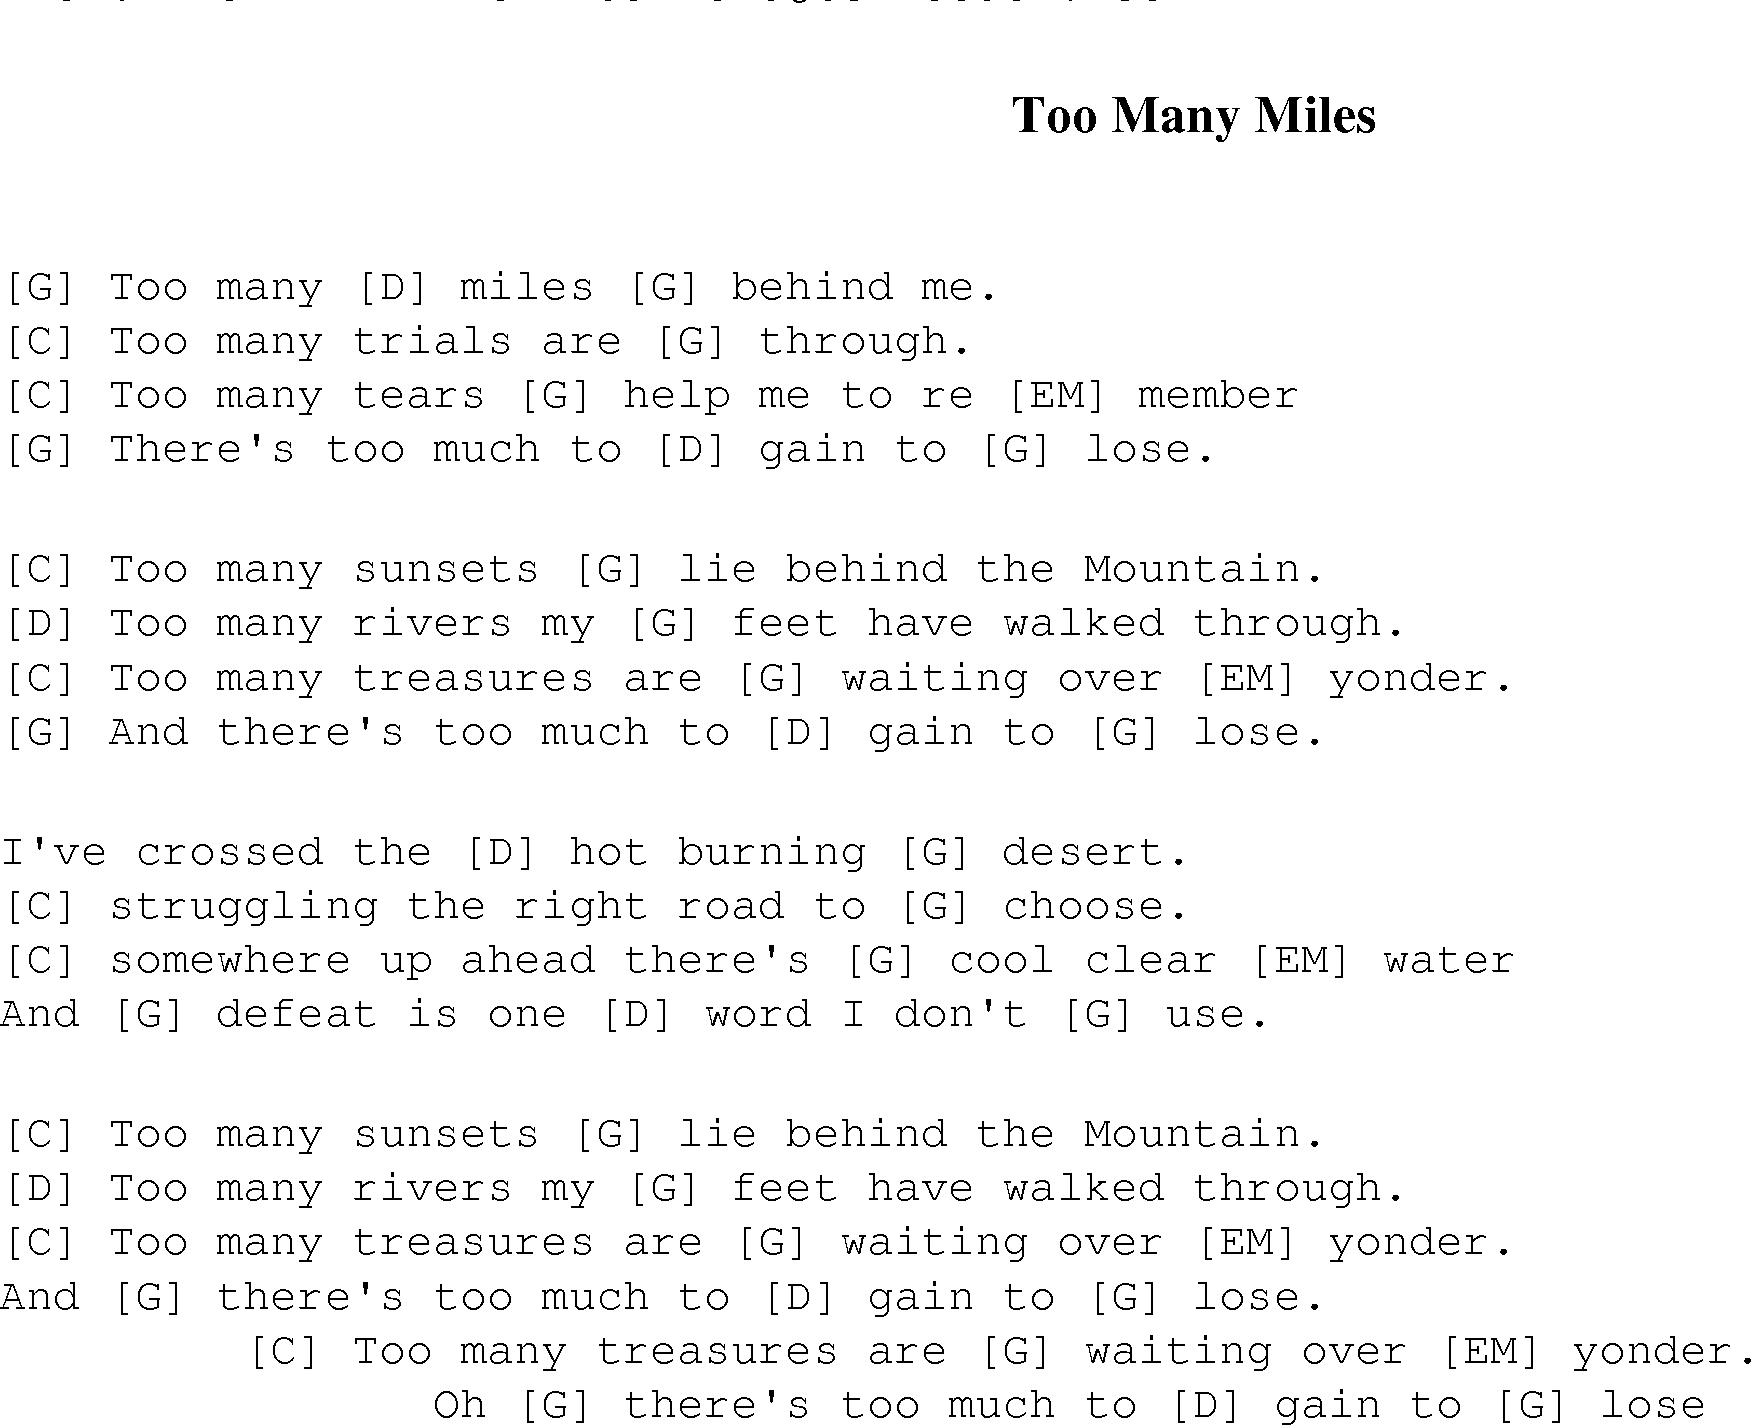 Gospel Song: too_many_miles, lyrics and chords.